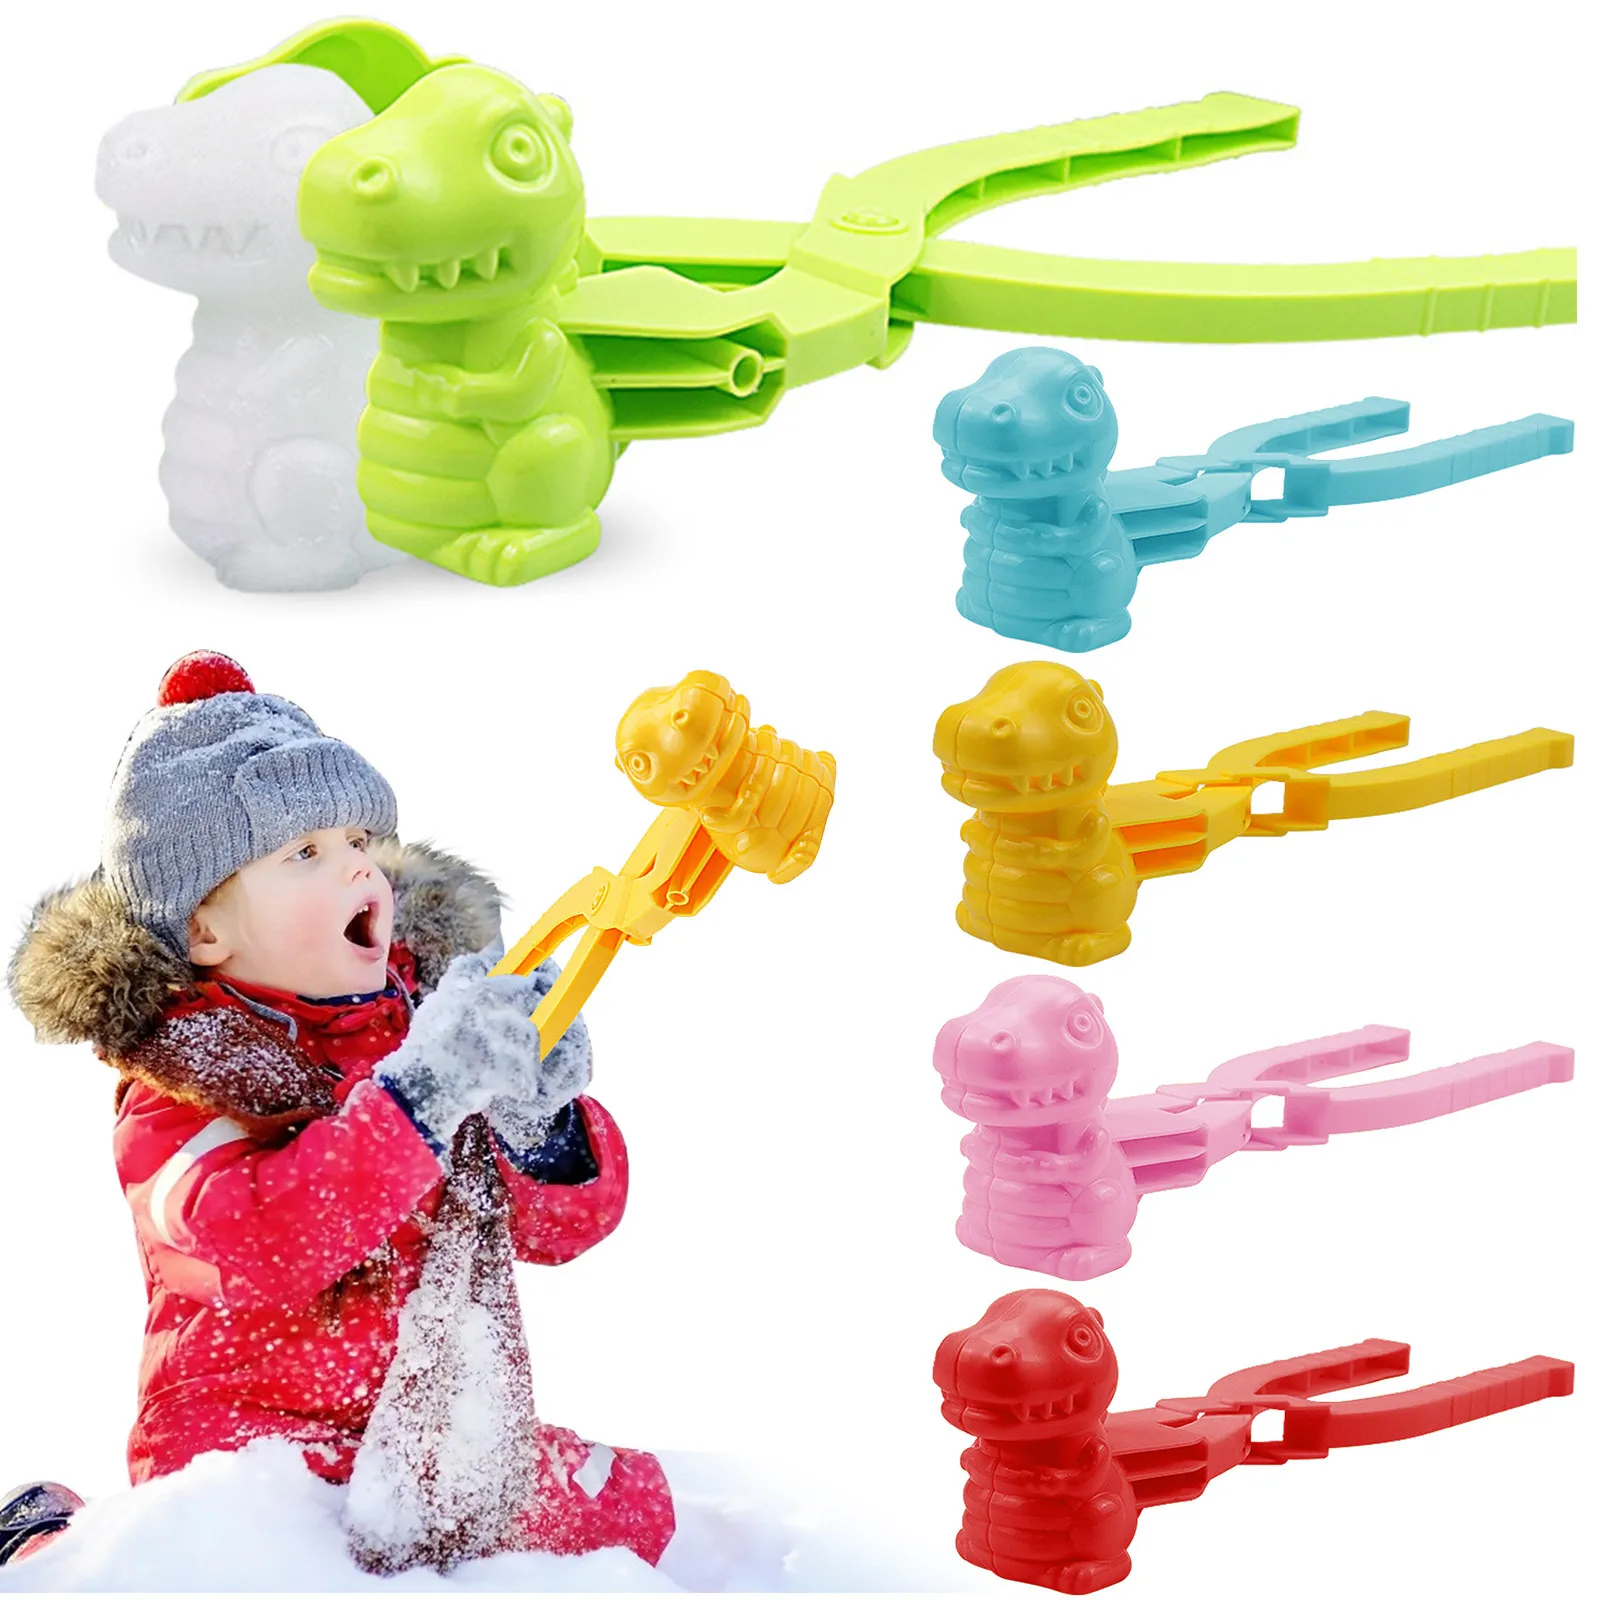 Switchable Winter Plastic Snowball Maker Clip metiet Snowball Maker Clip Snow Toys for Kids and Adults Winter Outdoor Play Heart Shaped Snowball Maker Star Snowball Maker 